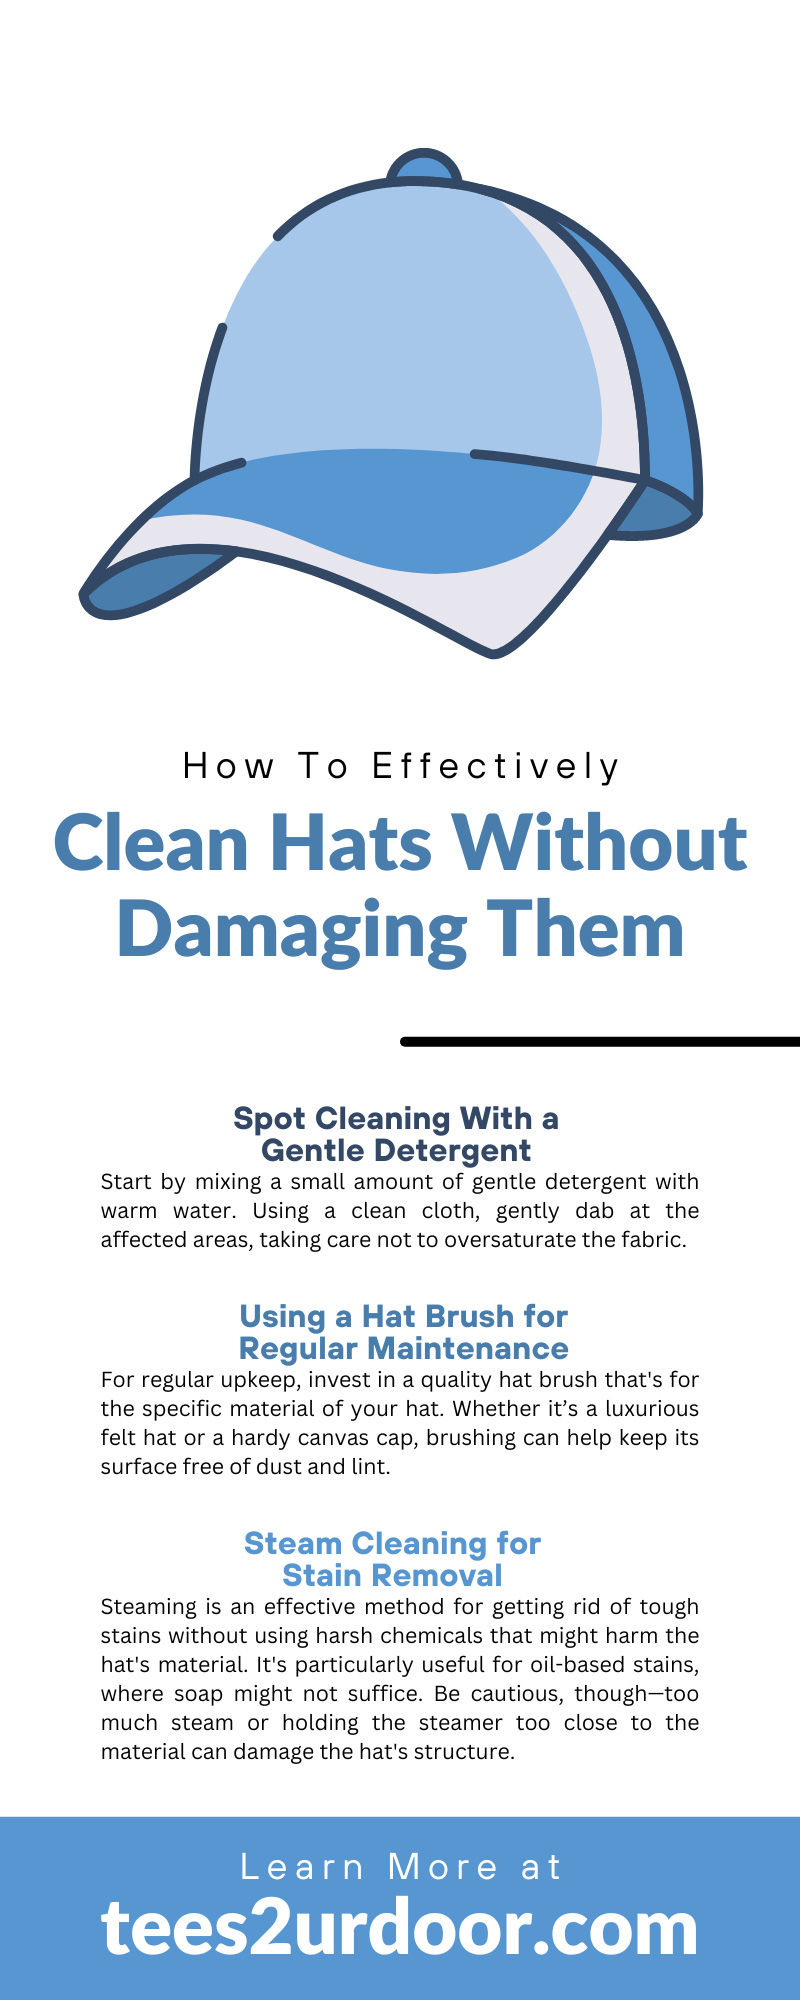 How To Effectively Clean Hats Without Damaging Them